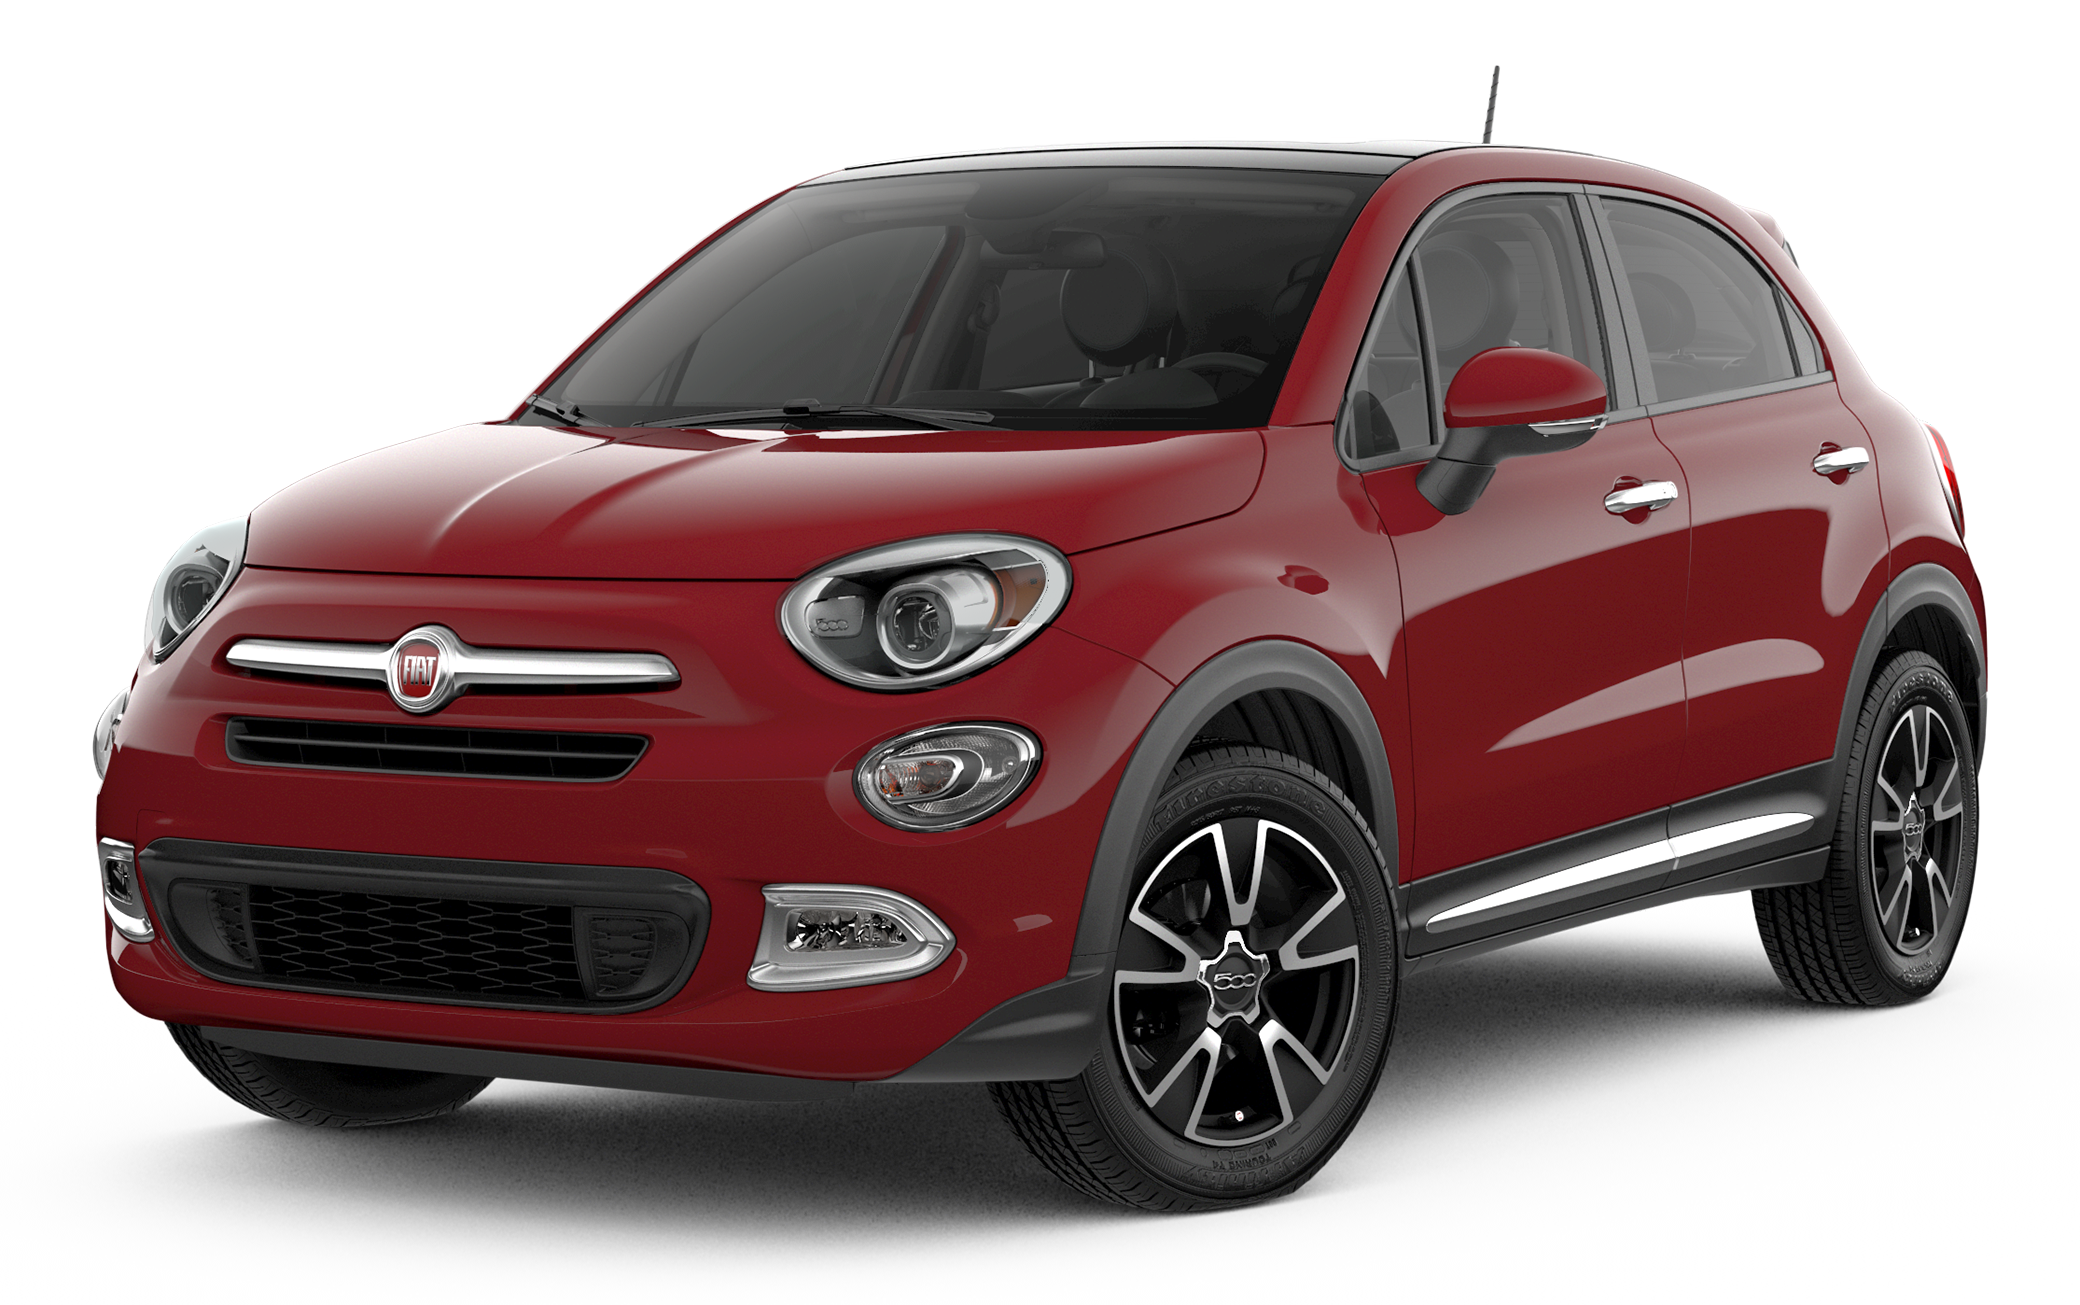 2018 FIAT 500X Incentives, Specials & Offers in Bakersfield CA